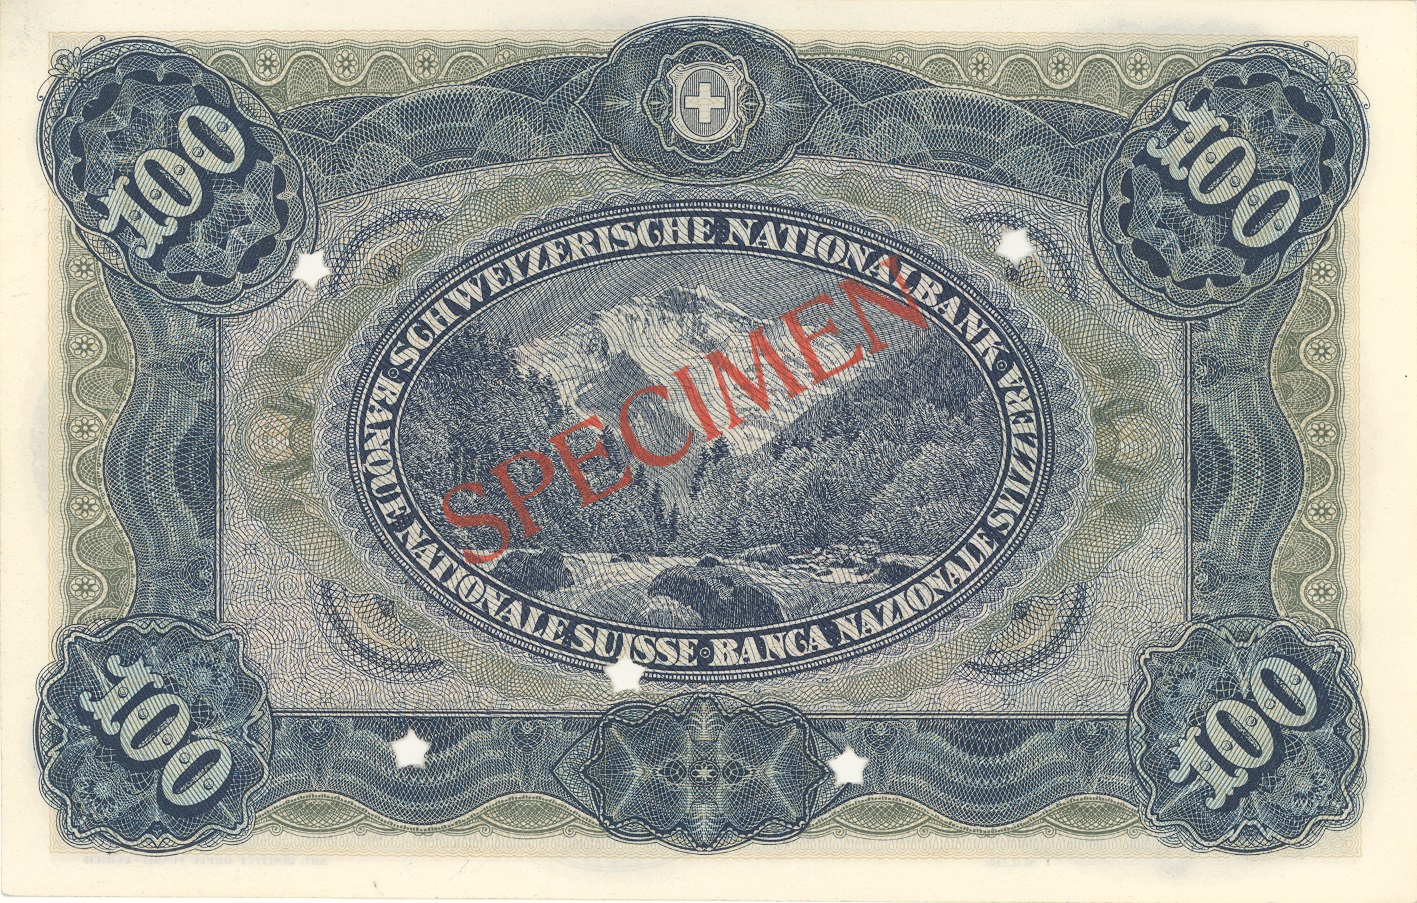 Third banknote series, 1918, 100 franc note, back